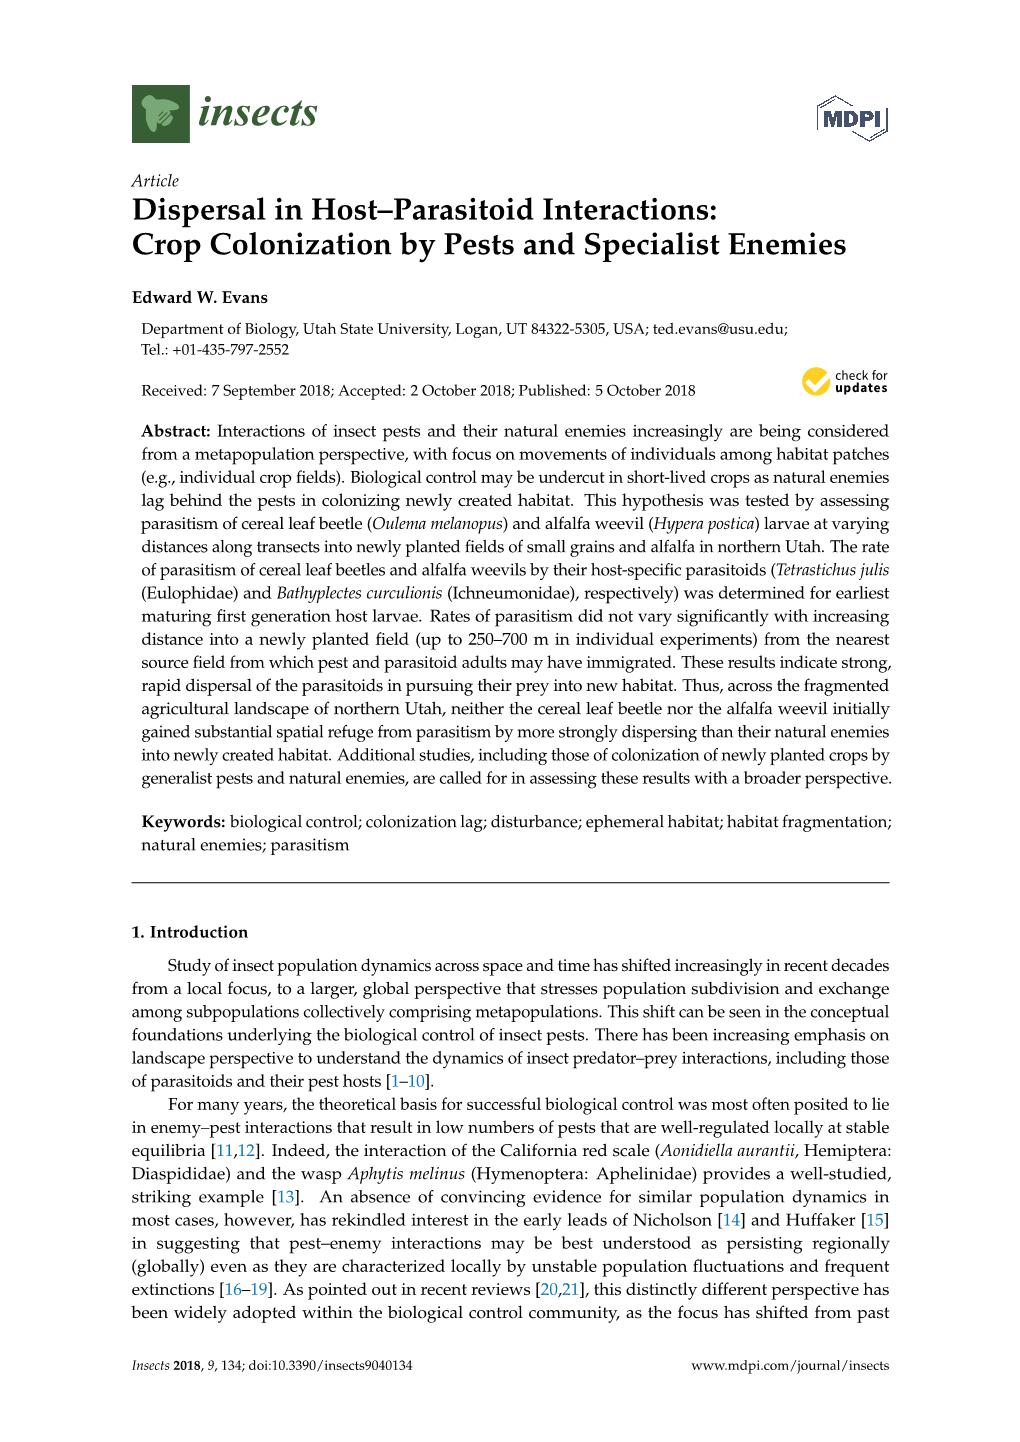 Crop Colonization by Pests and Specialist Enemies